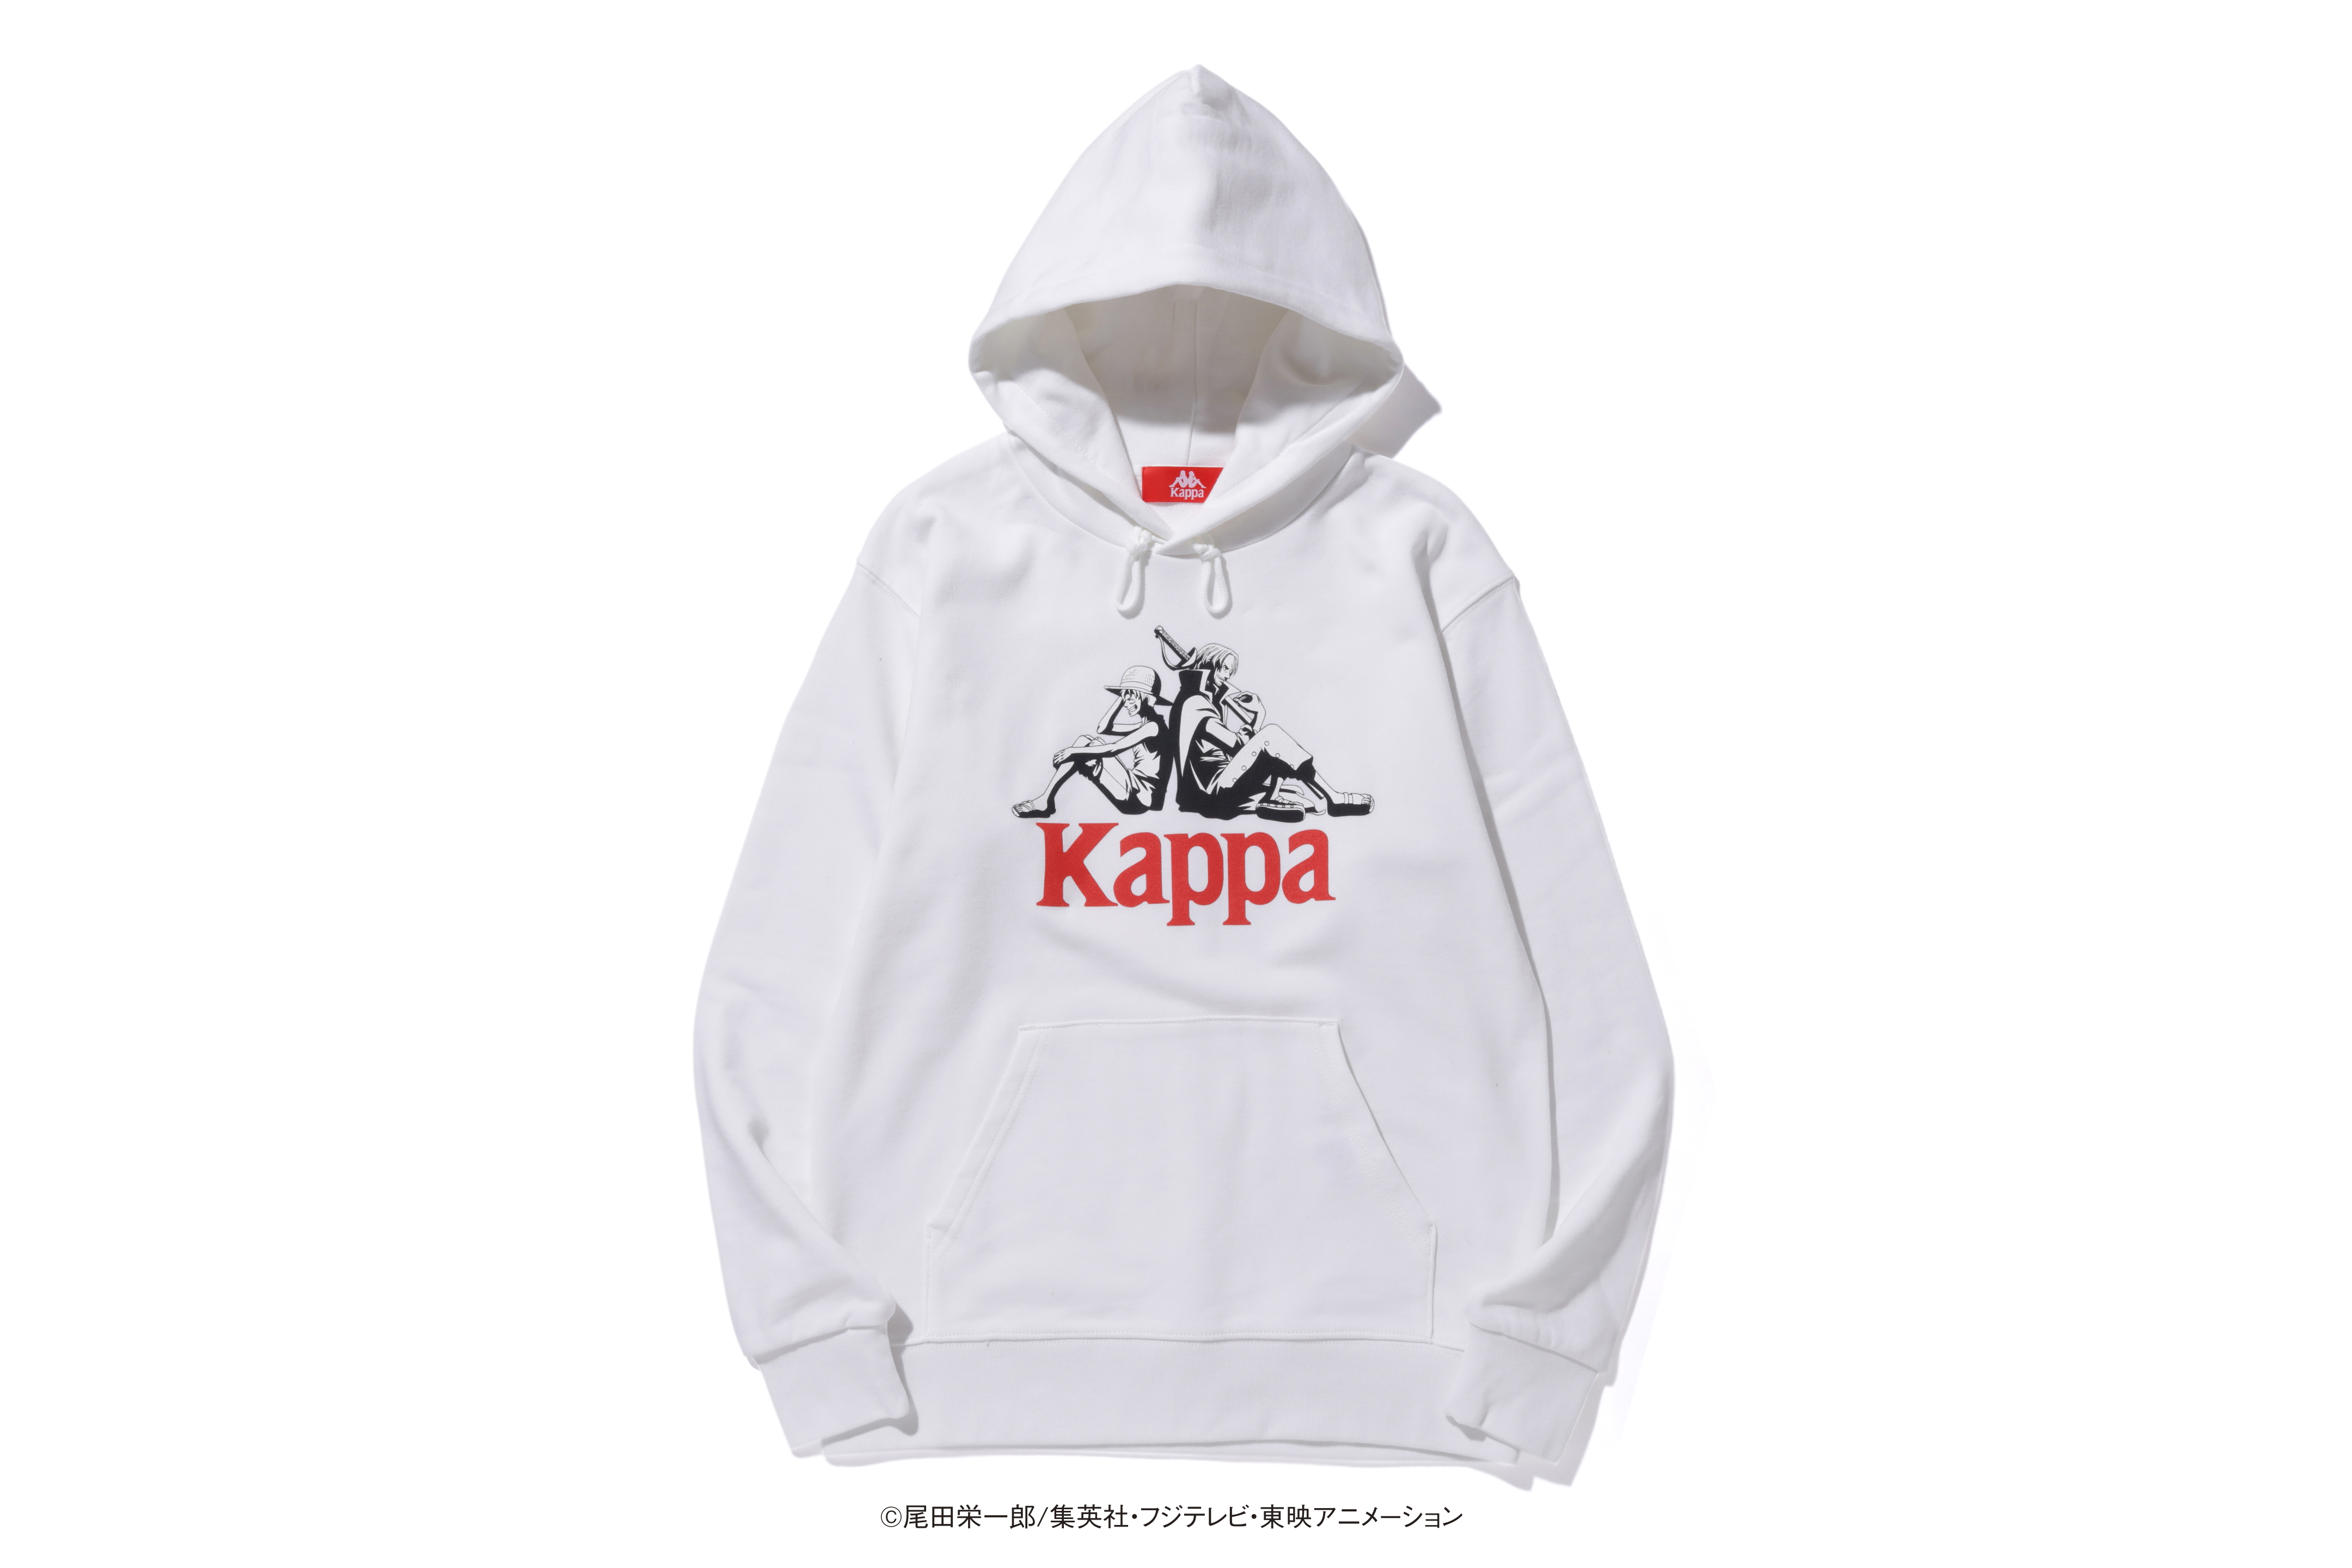 One Piece Clothing Collection to Drop in Collaboration With Italian  Sportswear Brand Kappa, MOSHI MOSHI NIPPON